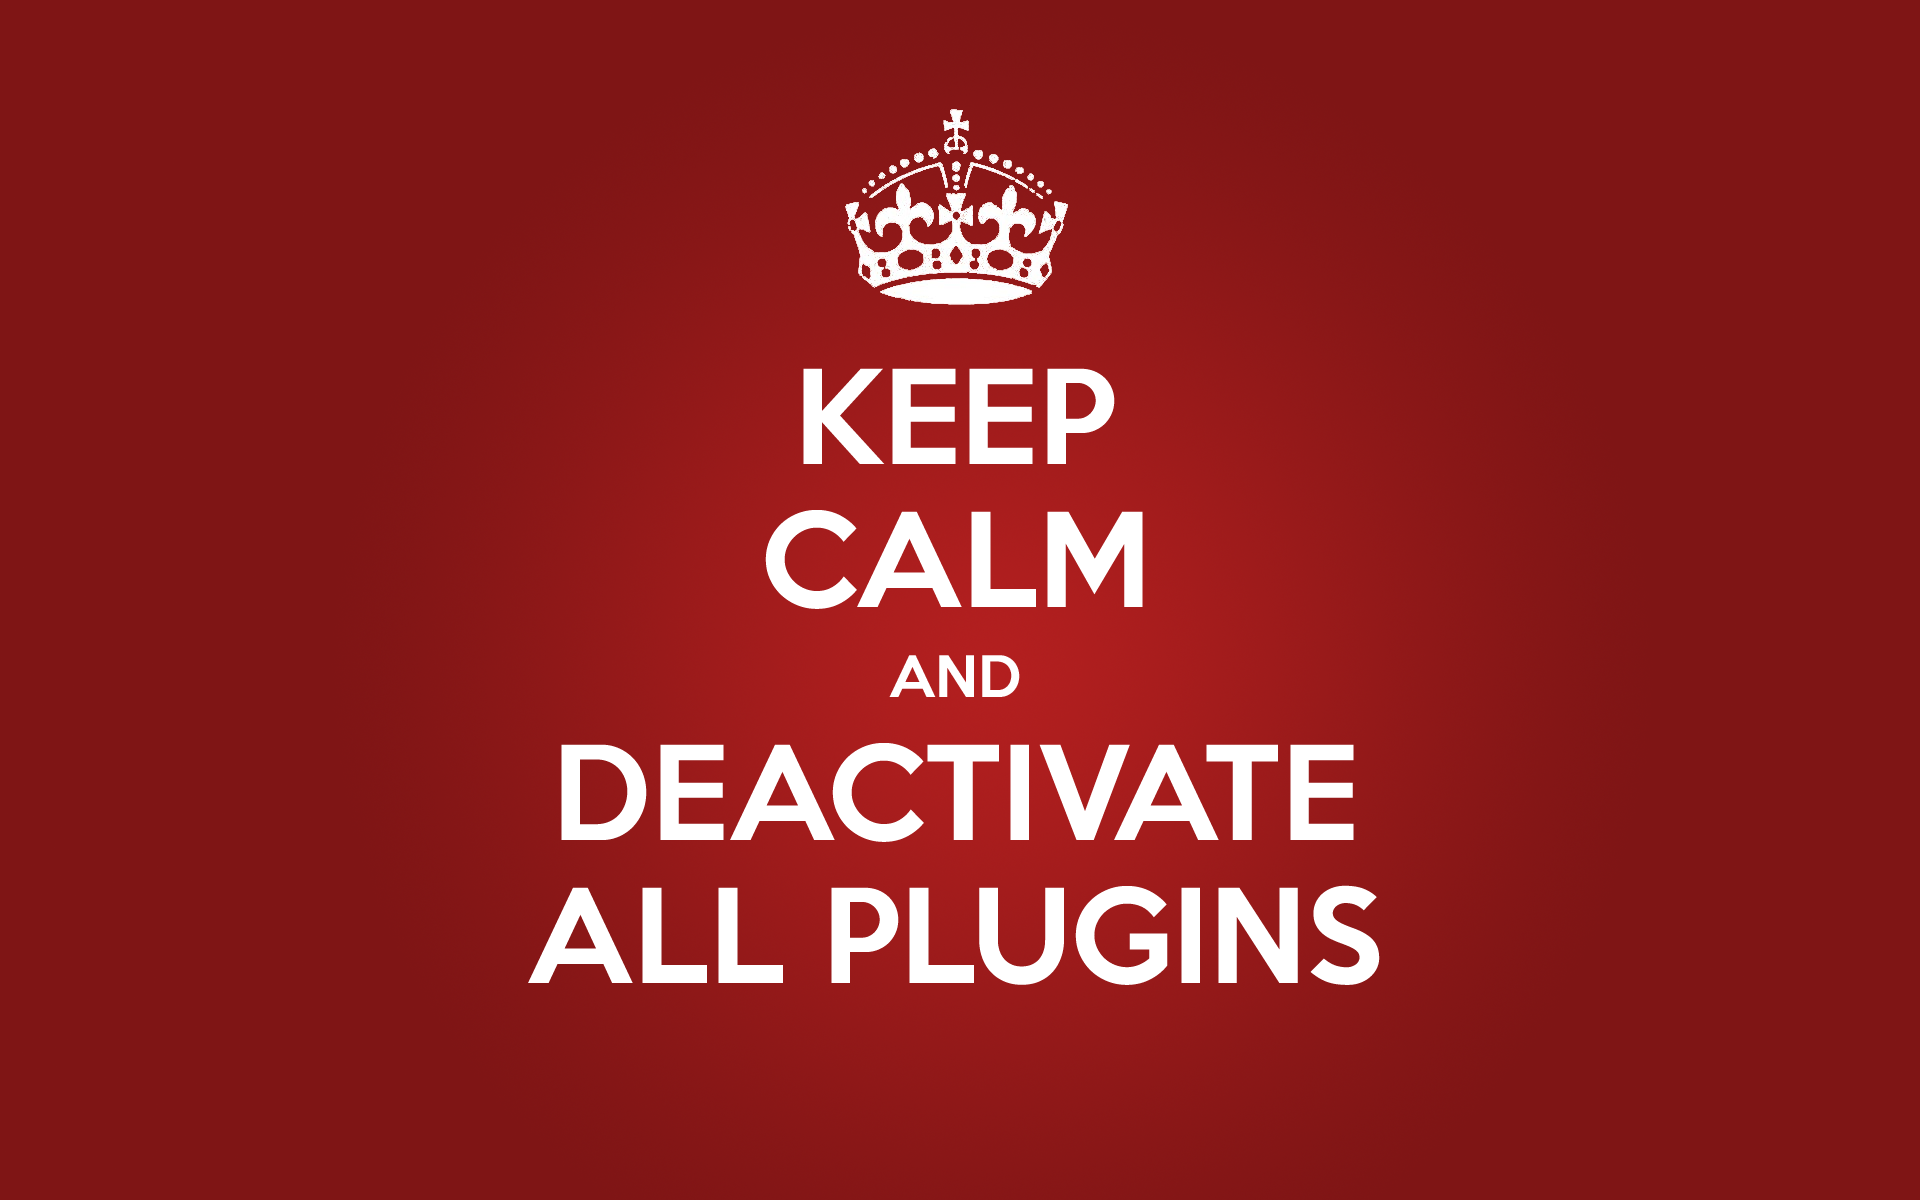 Keep Calm and Deactivate All Plugins